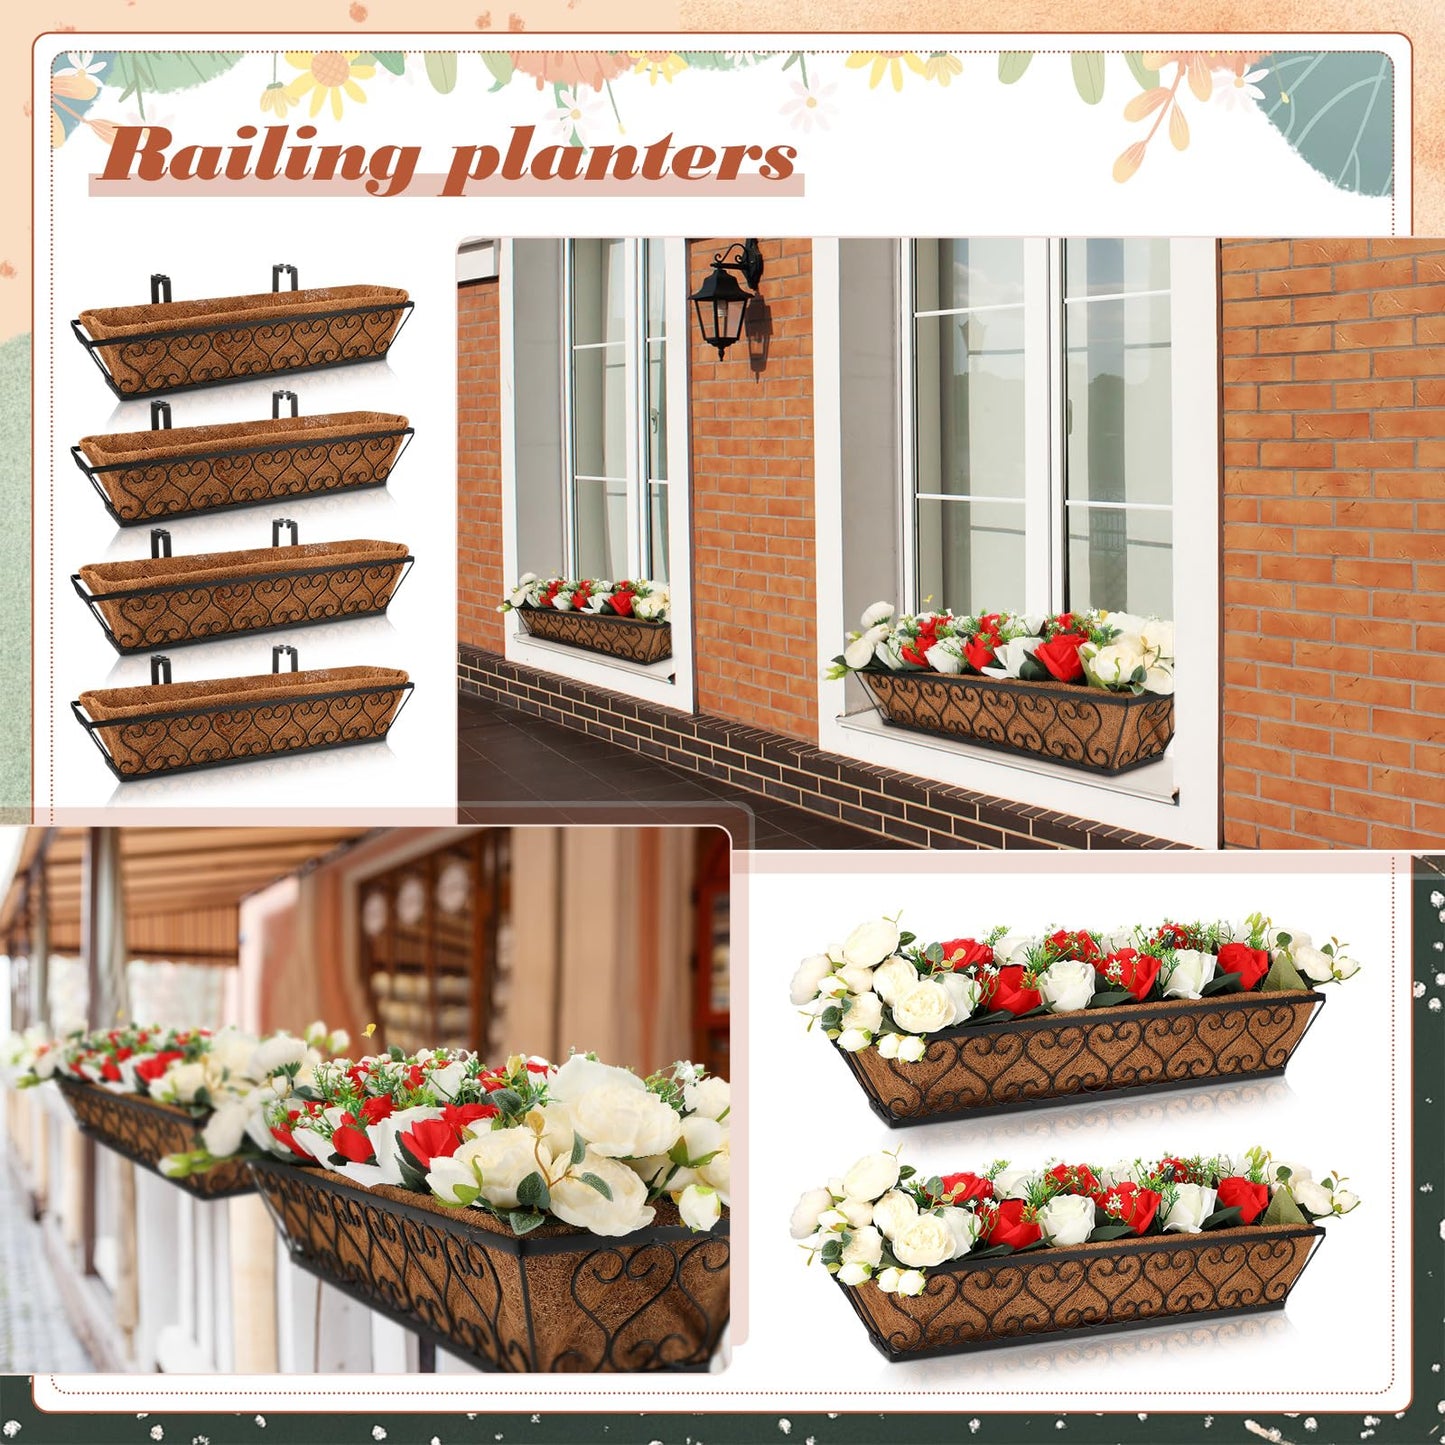 Wenqik 12 Set Window Deck Railing Planter Boxes with Coconut Liner 24" Balcony Railing Planter Metal Flower Box Hanging Decoration for Outdoor Fence Patio